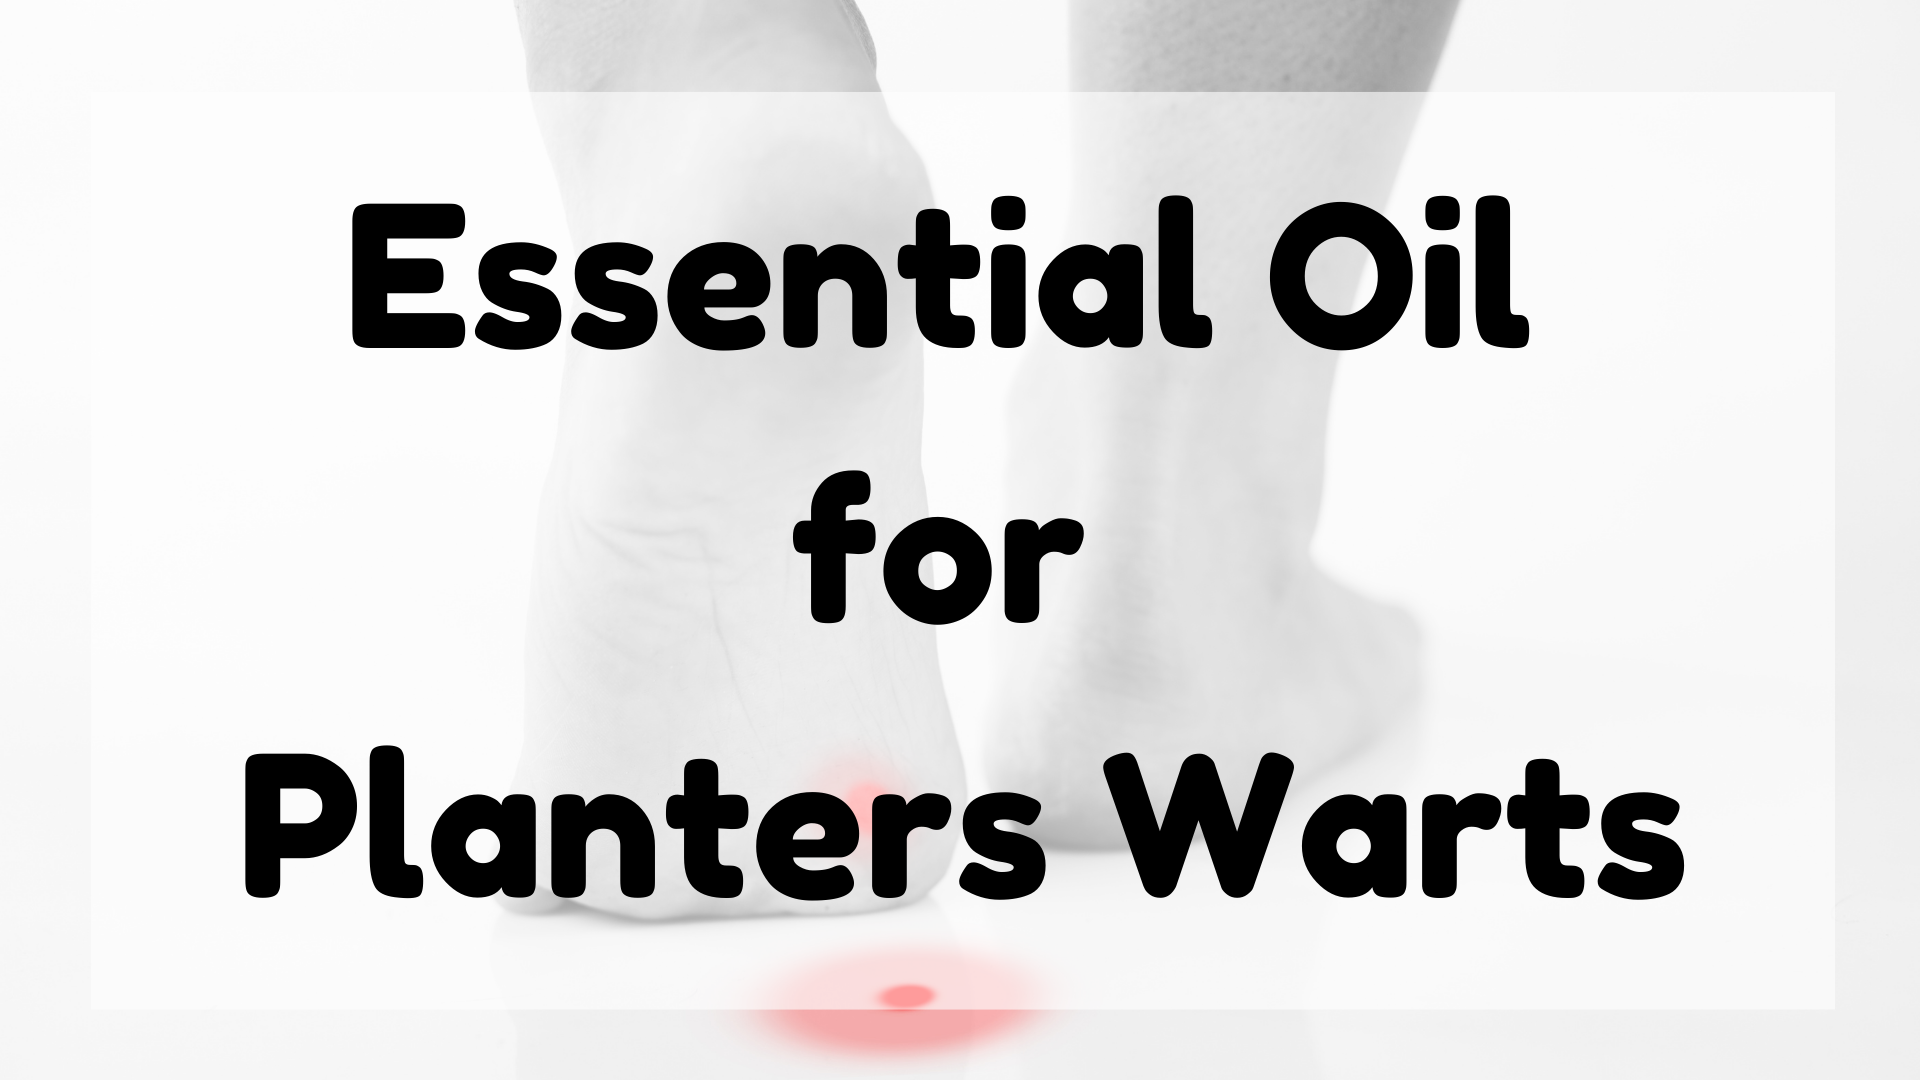 Essential Oil for Planters Warts featured image